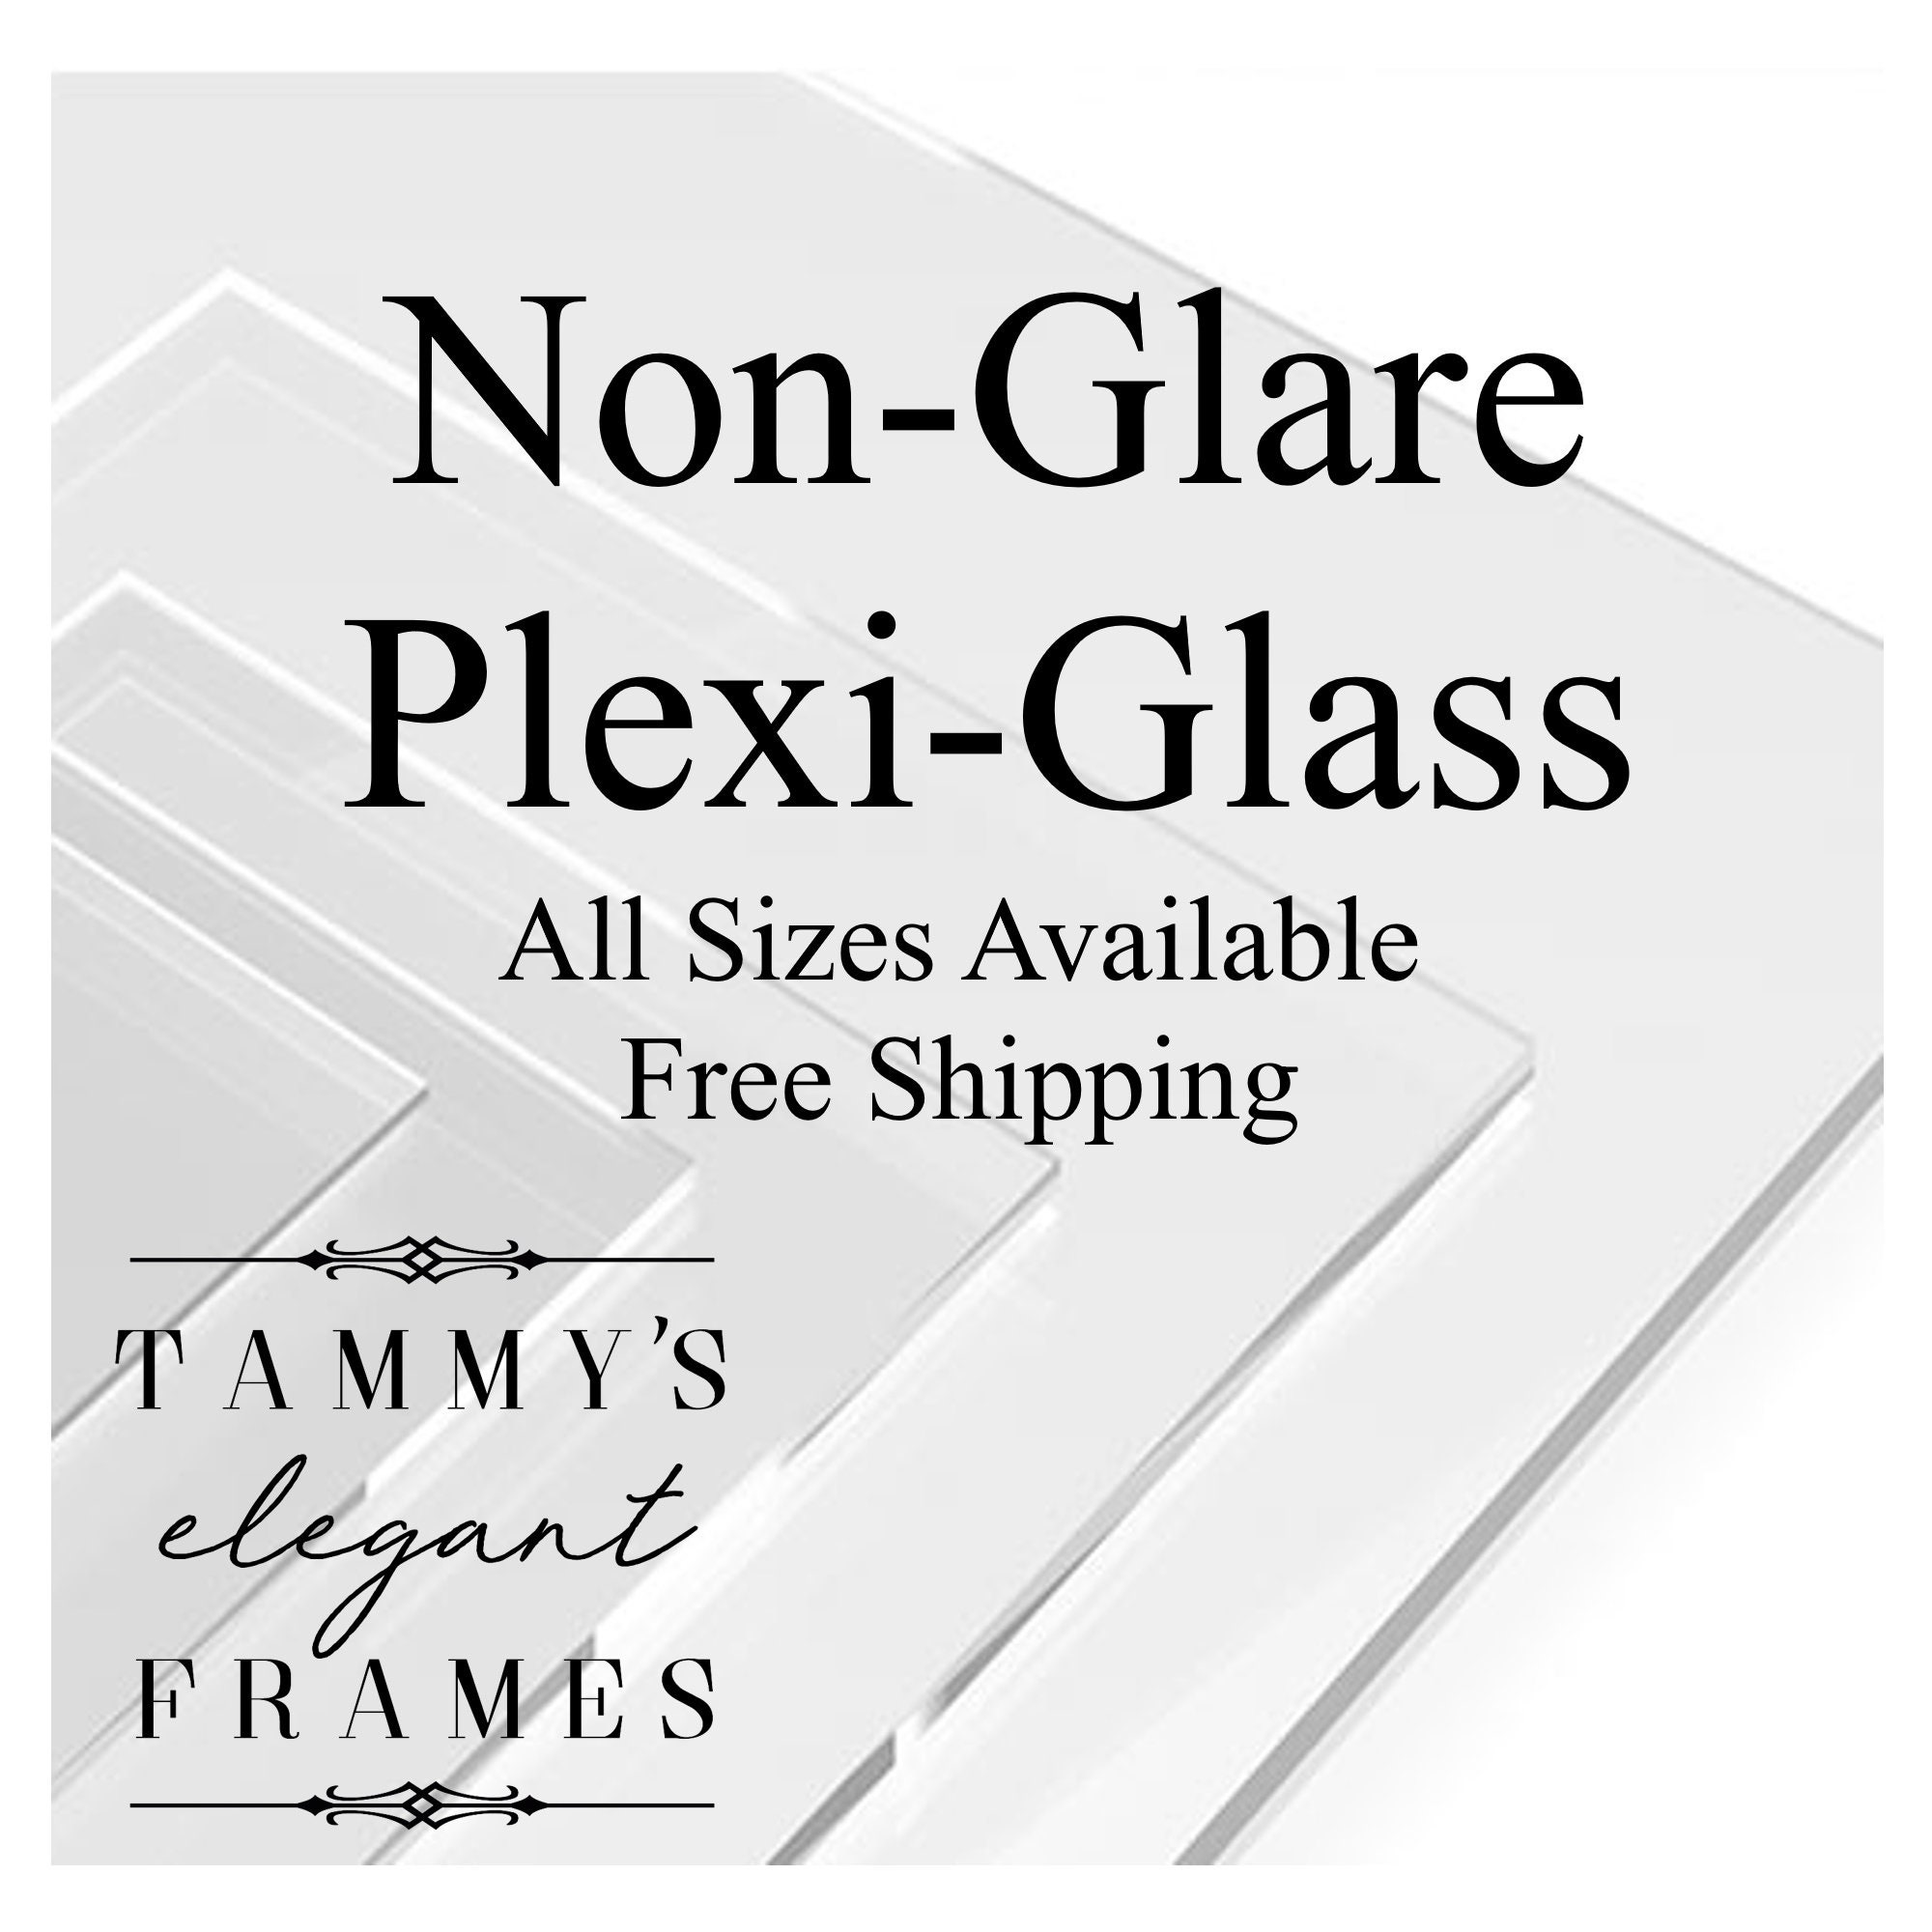 Custom Cut Custom Size Glass/mirrors 1/8, 1/4, 1/2 Thicknesses,  Seeded/seedy, Frosted, Lanterns, Tanks, Picture Frames, Shelves, Cabinets 